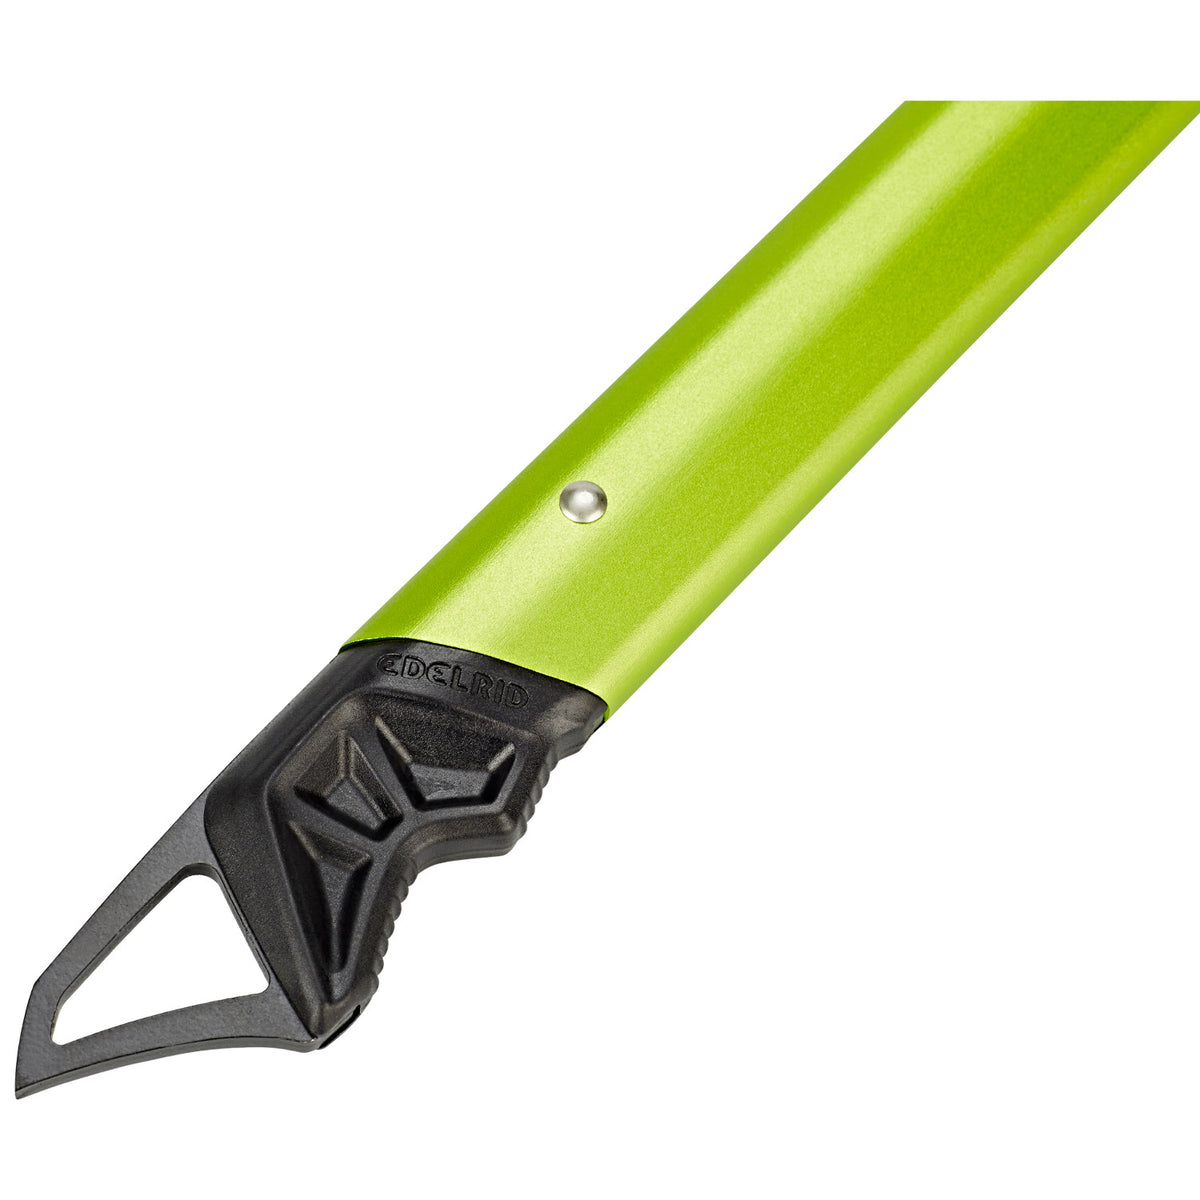 Edelrid Attila Ice Axe, close up of the spike